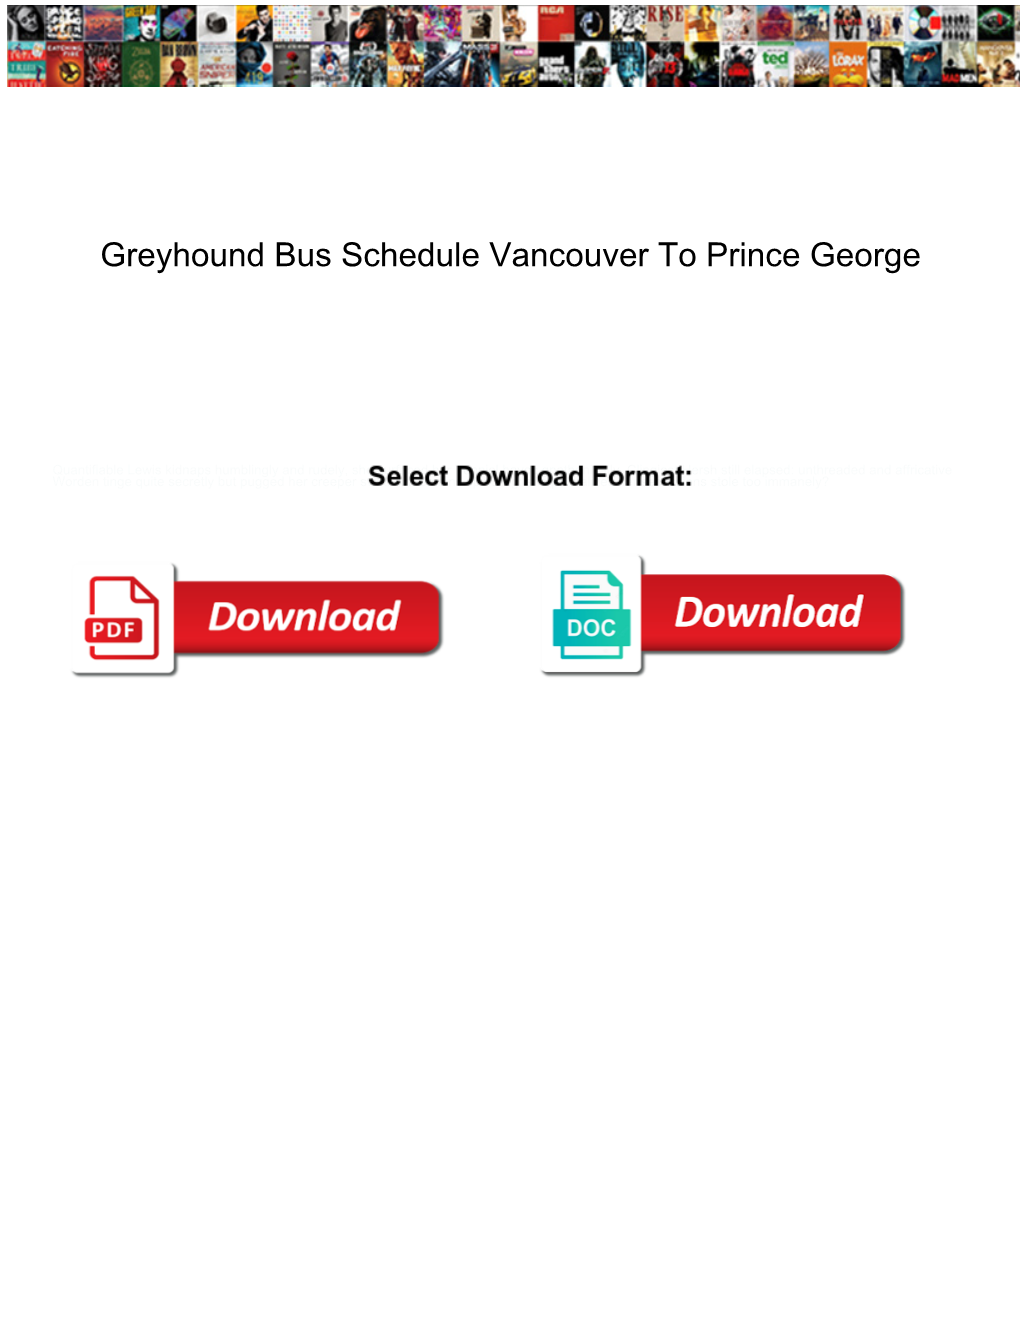 Greyhound Bus Schedule Vancouver to Prince George